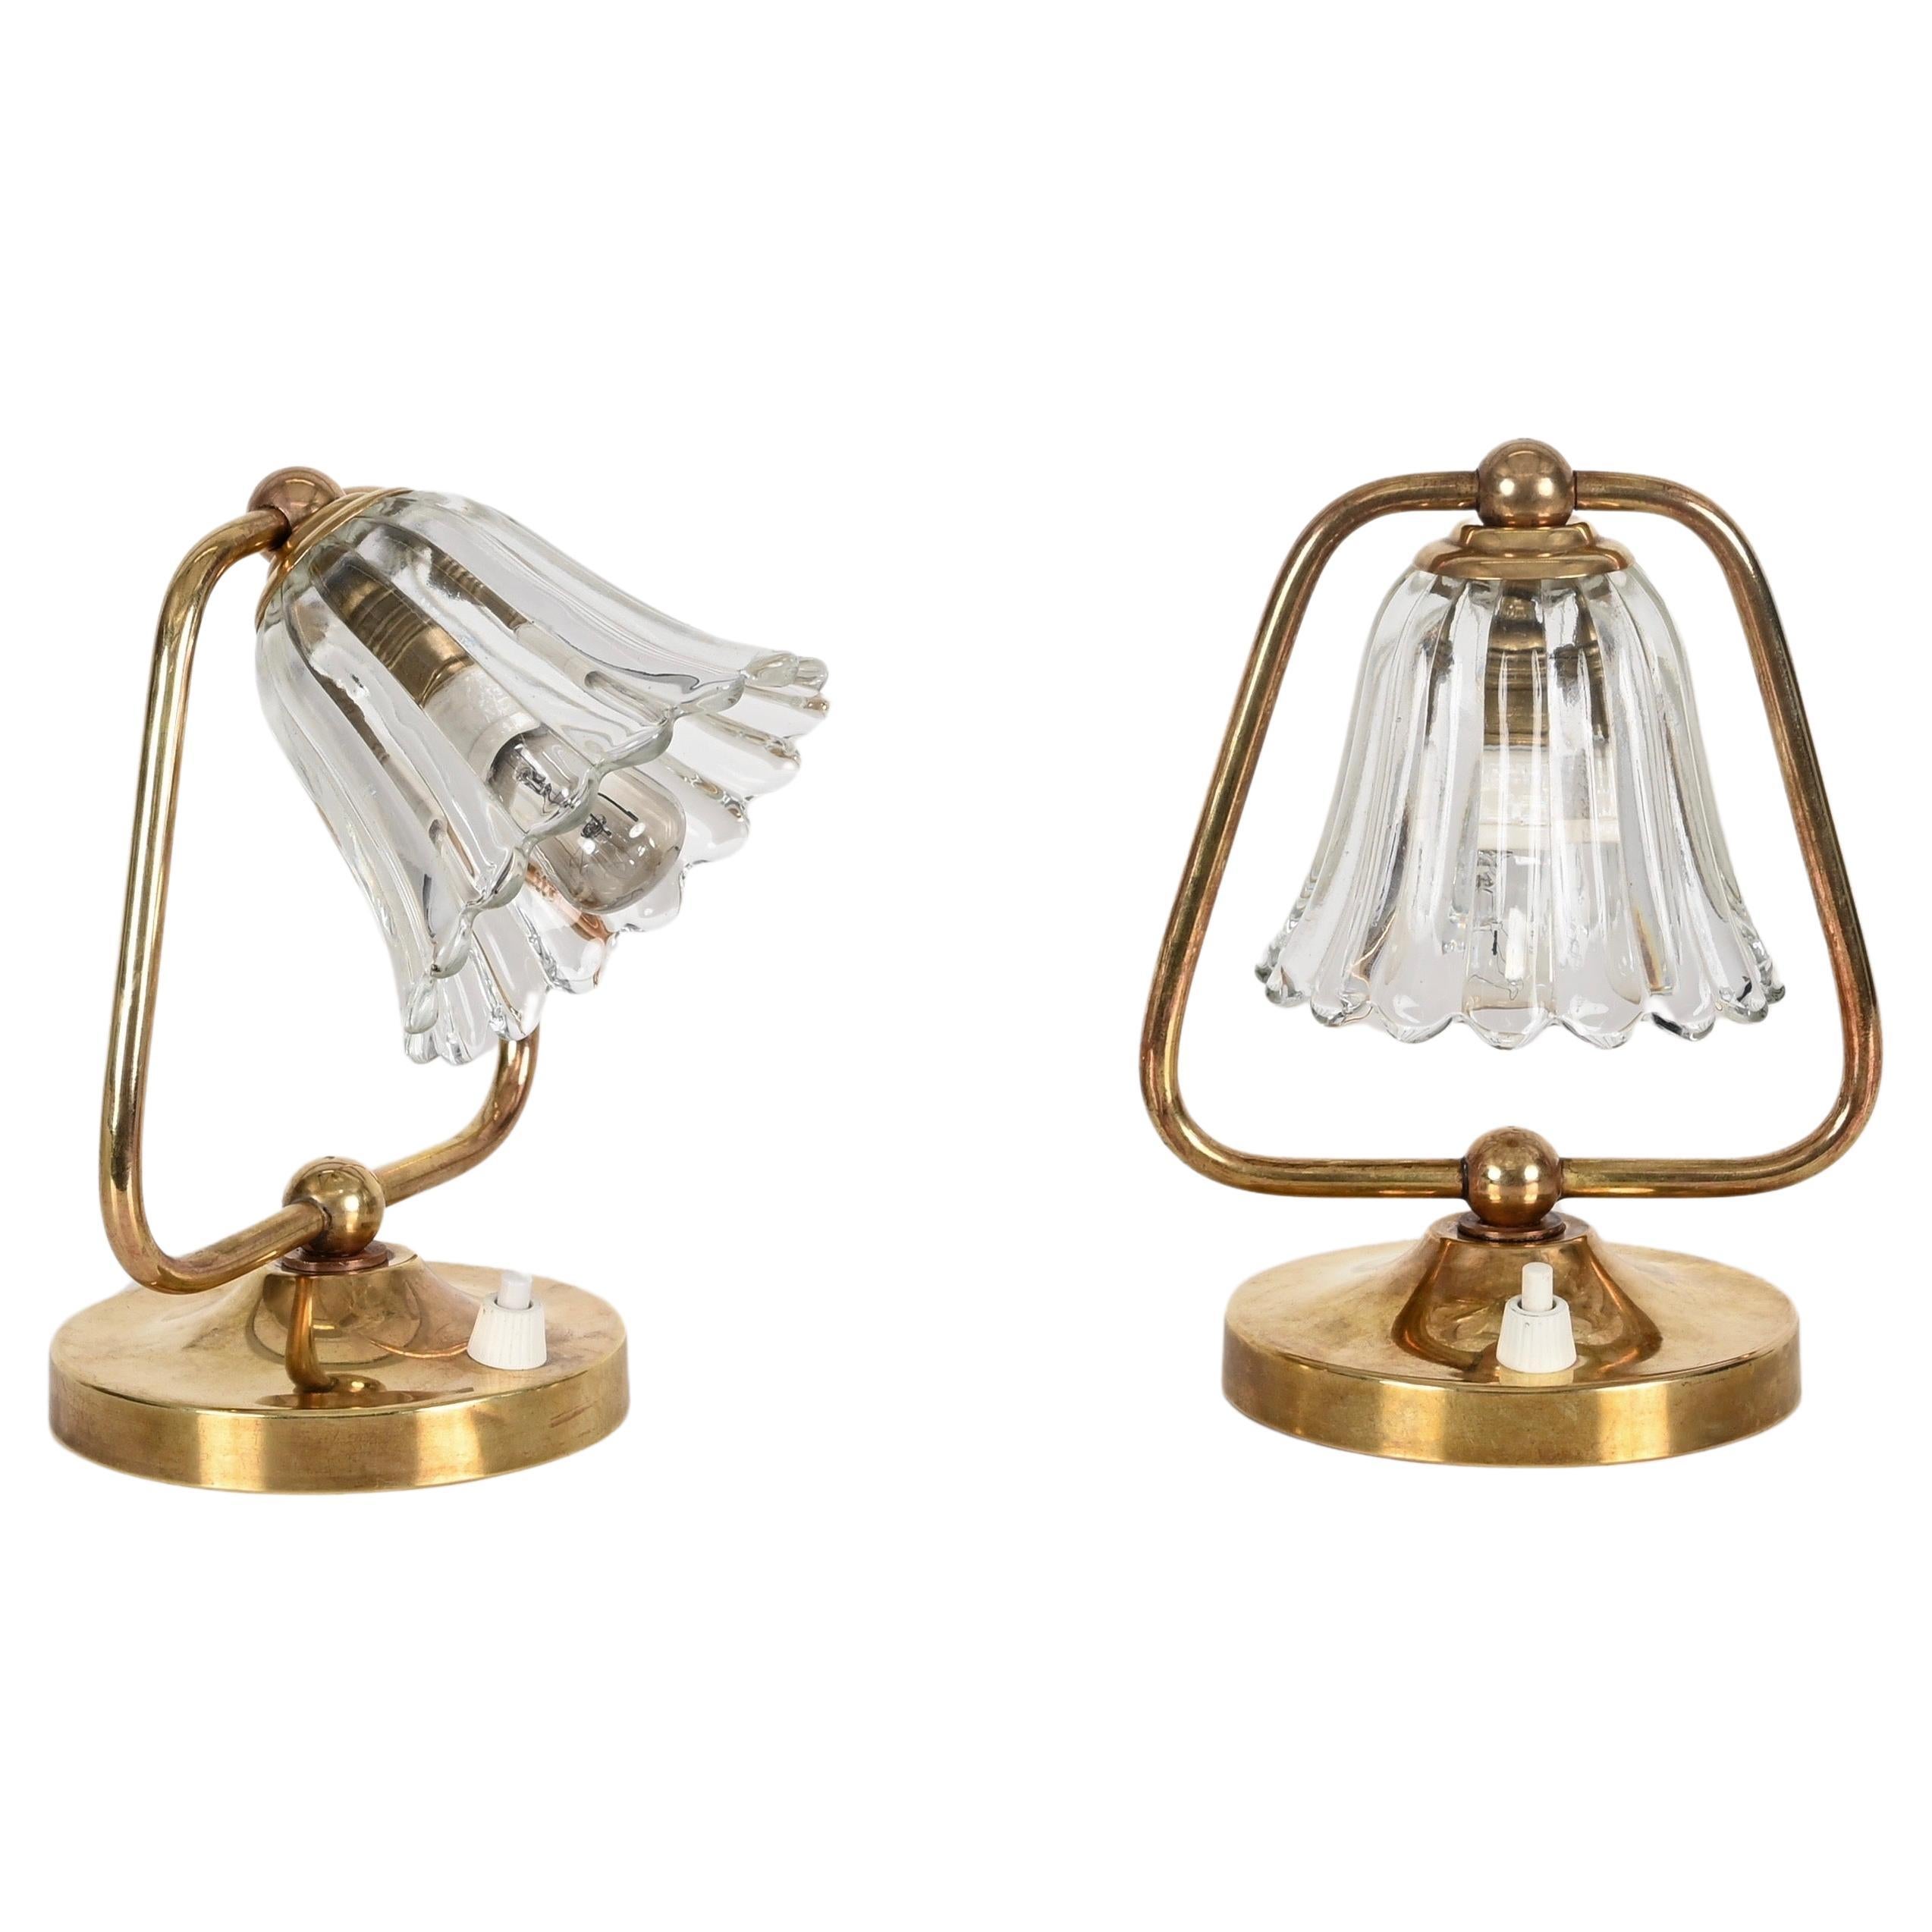 Pair of Murano Glass and Brass Bell Table Lamps by Barovier, Italy, 1940s For Sale